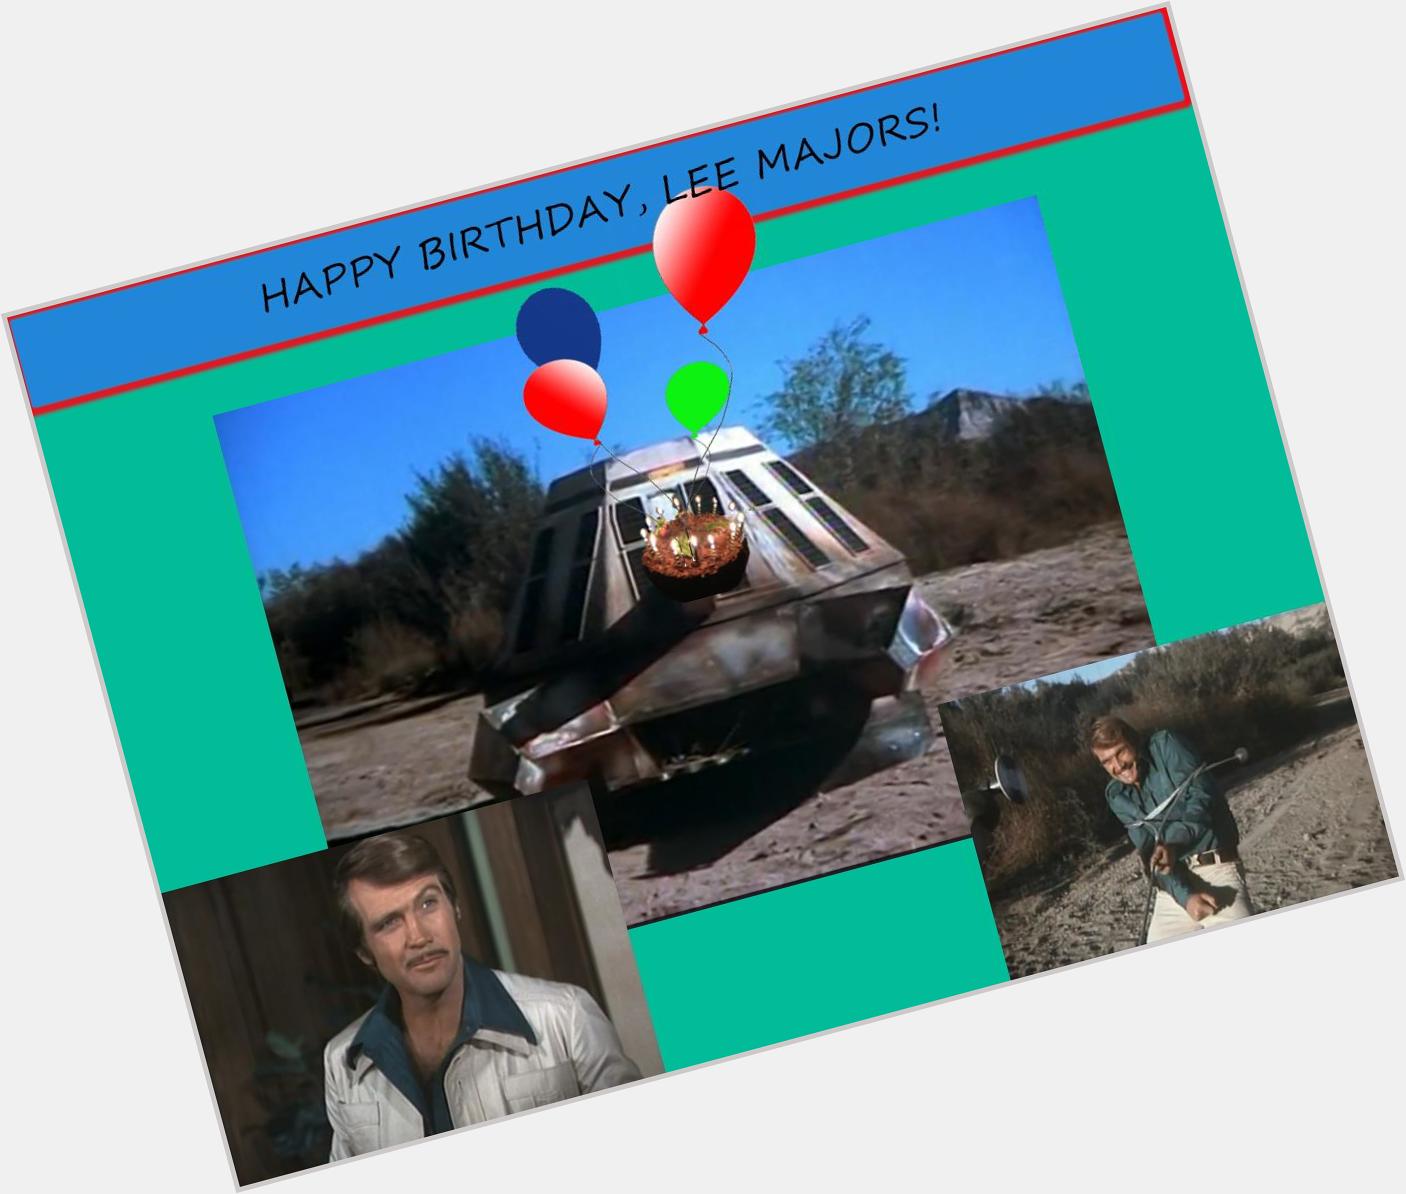 Happy birthday to Lee Majors! The one and only Bionic Man! 